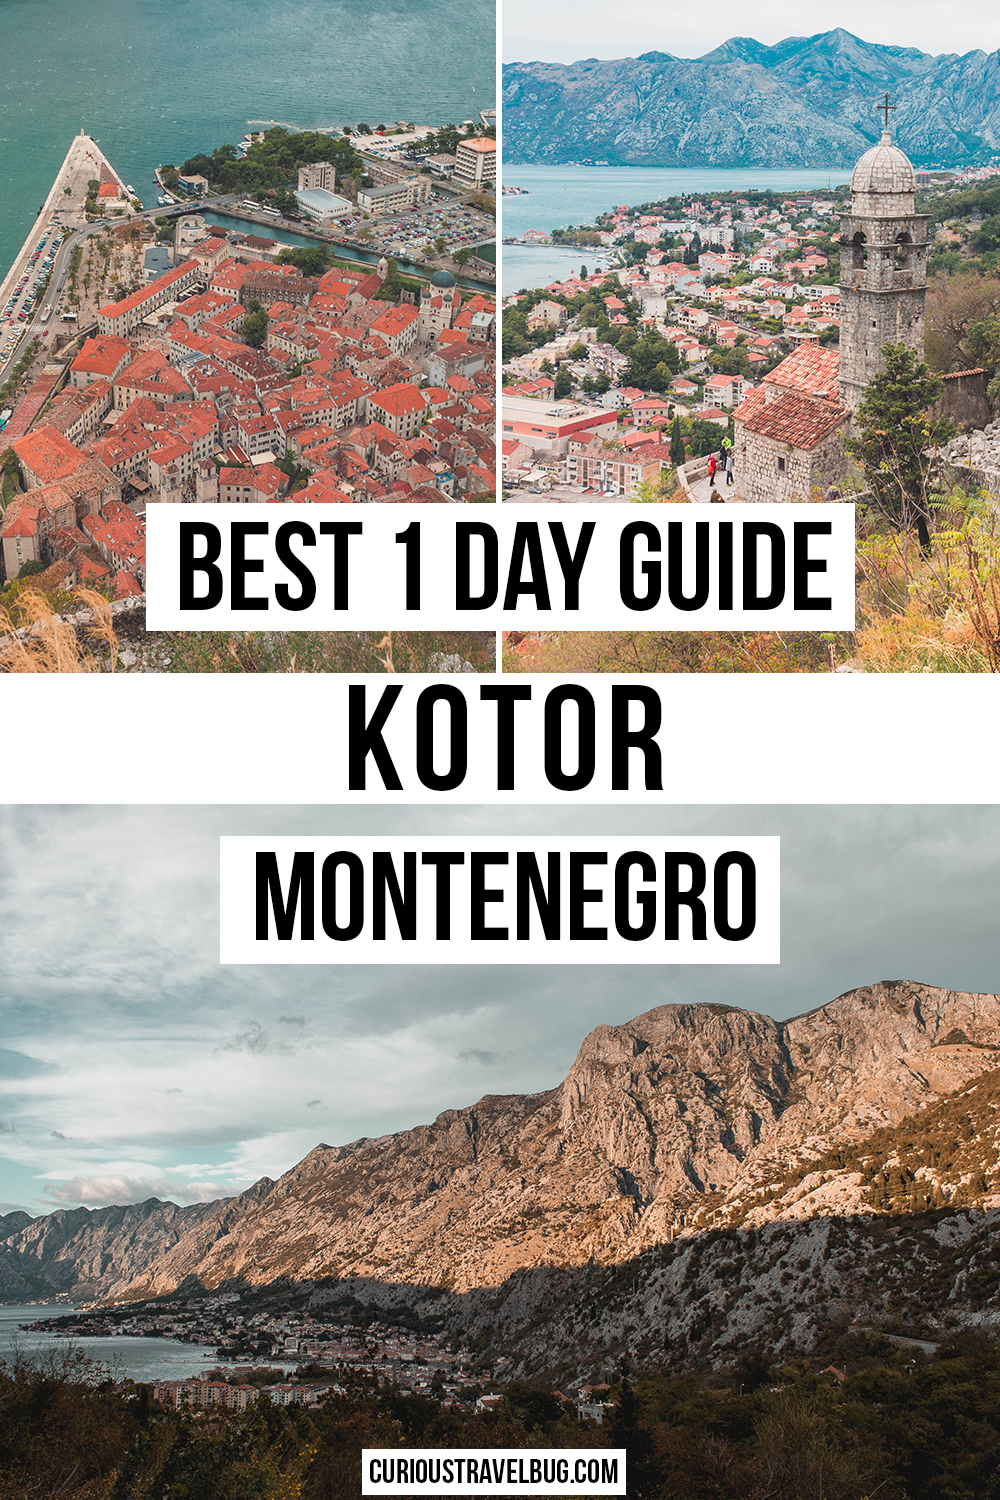 The best things to do in Montenegro's prettiest walled city, Kotor. Including walking the walls to the castle above Kotor, the best views of Kotor Bay, where the best day trips are, and how to have the perfect vacation in Kotor. This is perfect as a day trip from Dubrovnik to Kotor or even better as a one night on your Balkan itinerary.